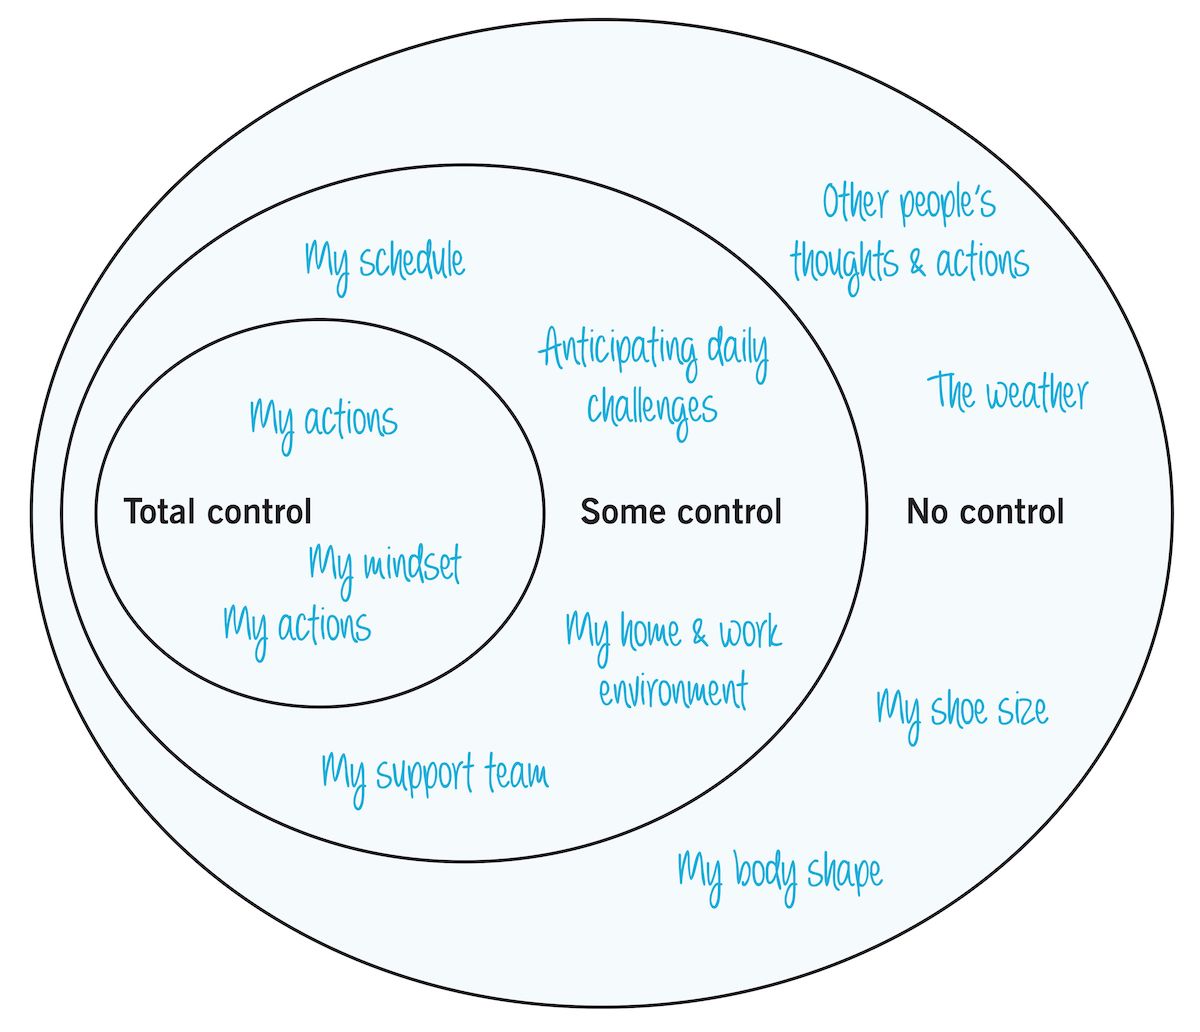 Control Area: Graphic showing three overlapping circles labeled “Total Control”, “Some Control”, and “No Control”.  People can use the image to focus their attention on what they can control - and thus reduce their stress levels.